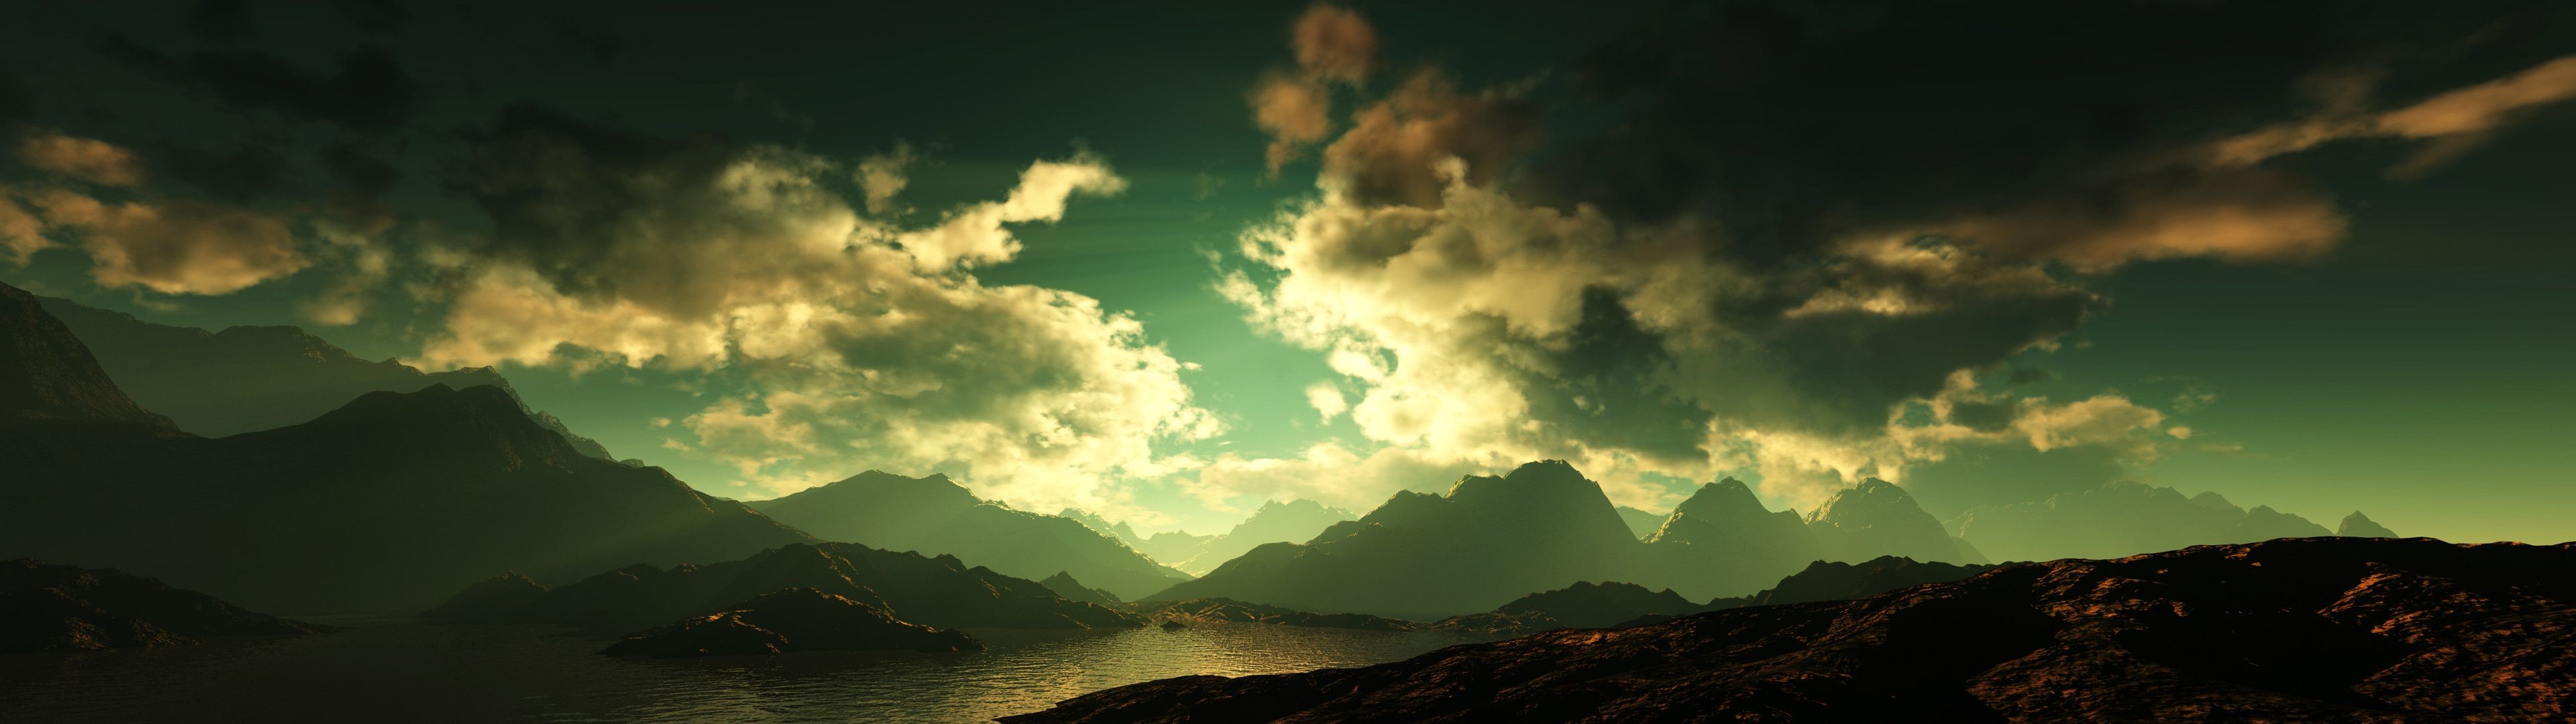 3840x1080 Mountains Dual Monitor wallpapers